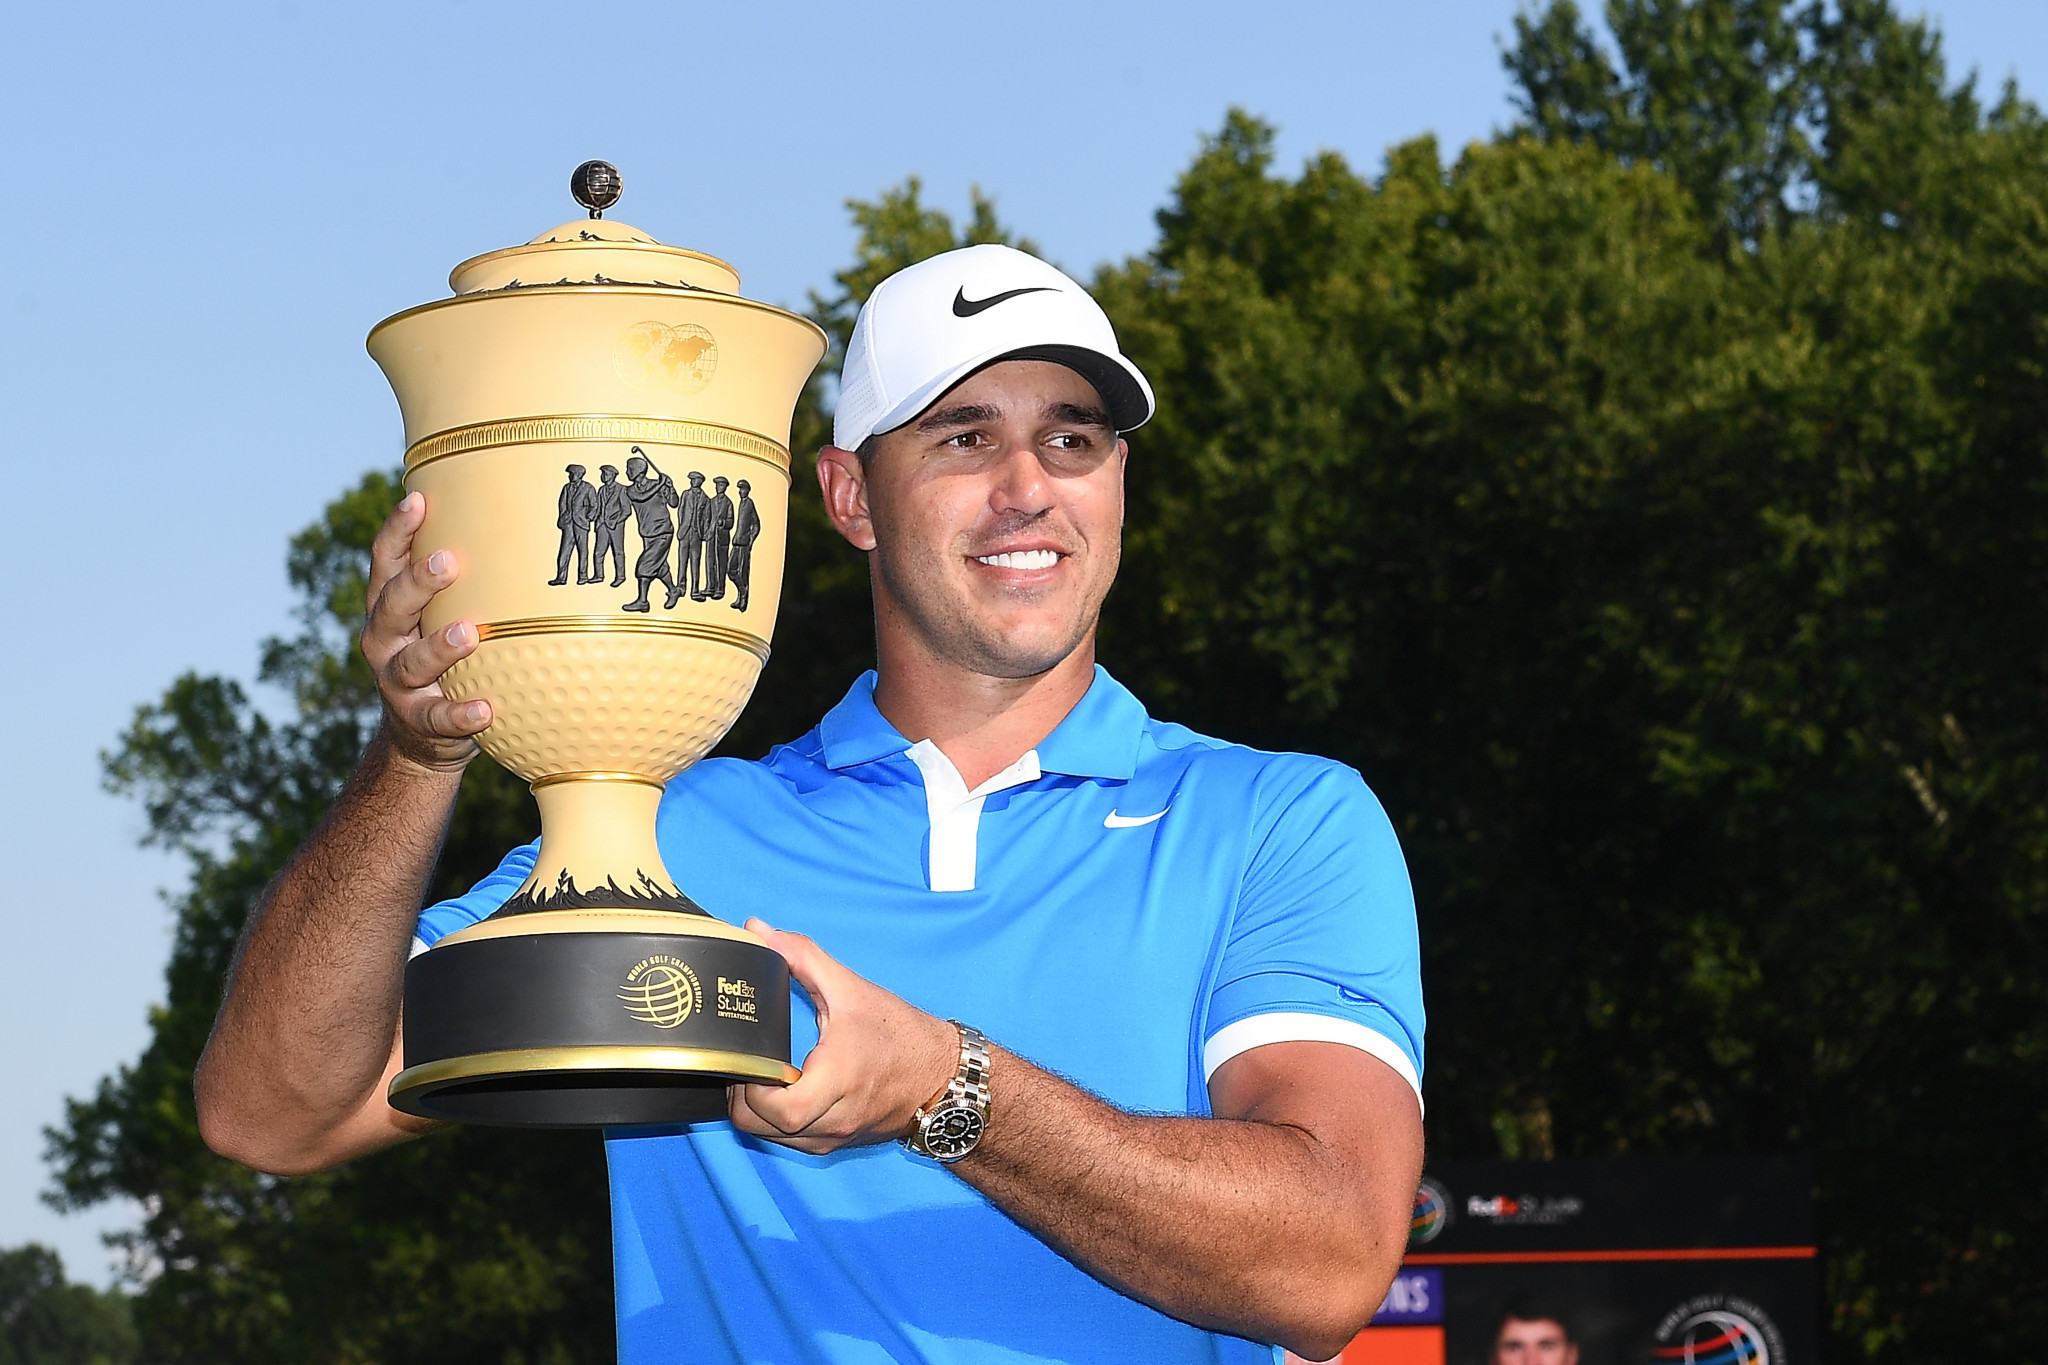 Koepka shines to win World Golf Championships-FedEx St. Jude Invitational as McIlroy fades in Memphis